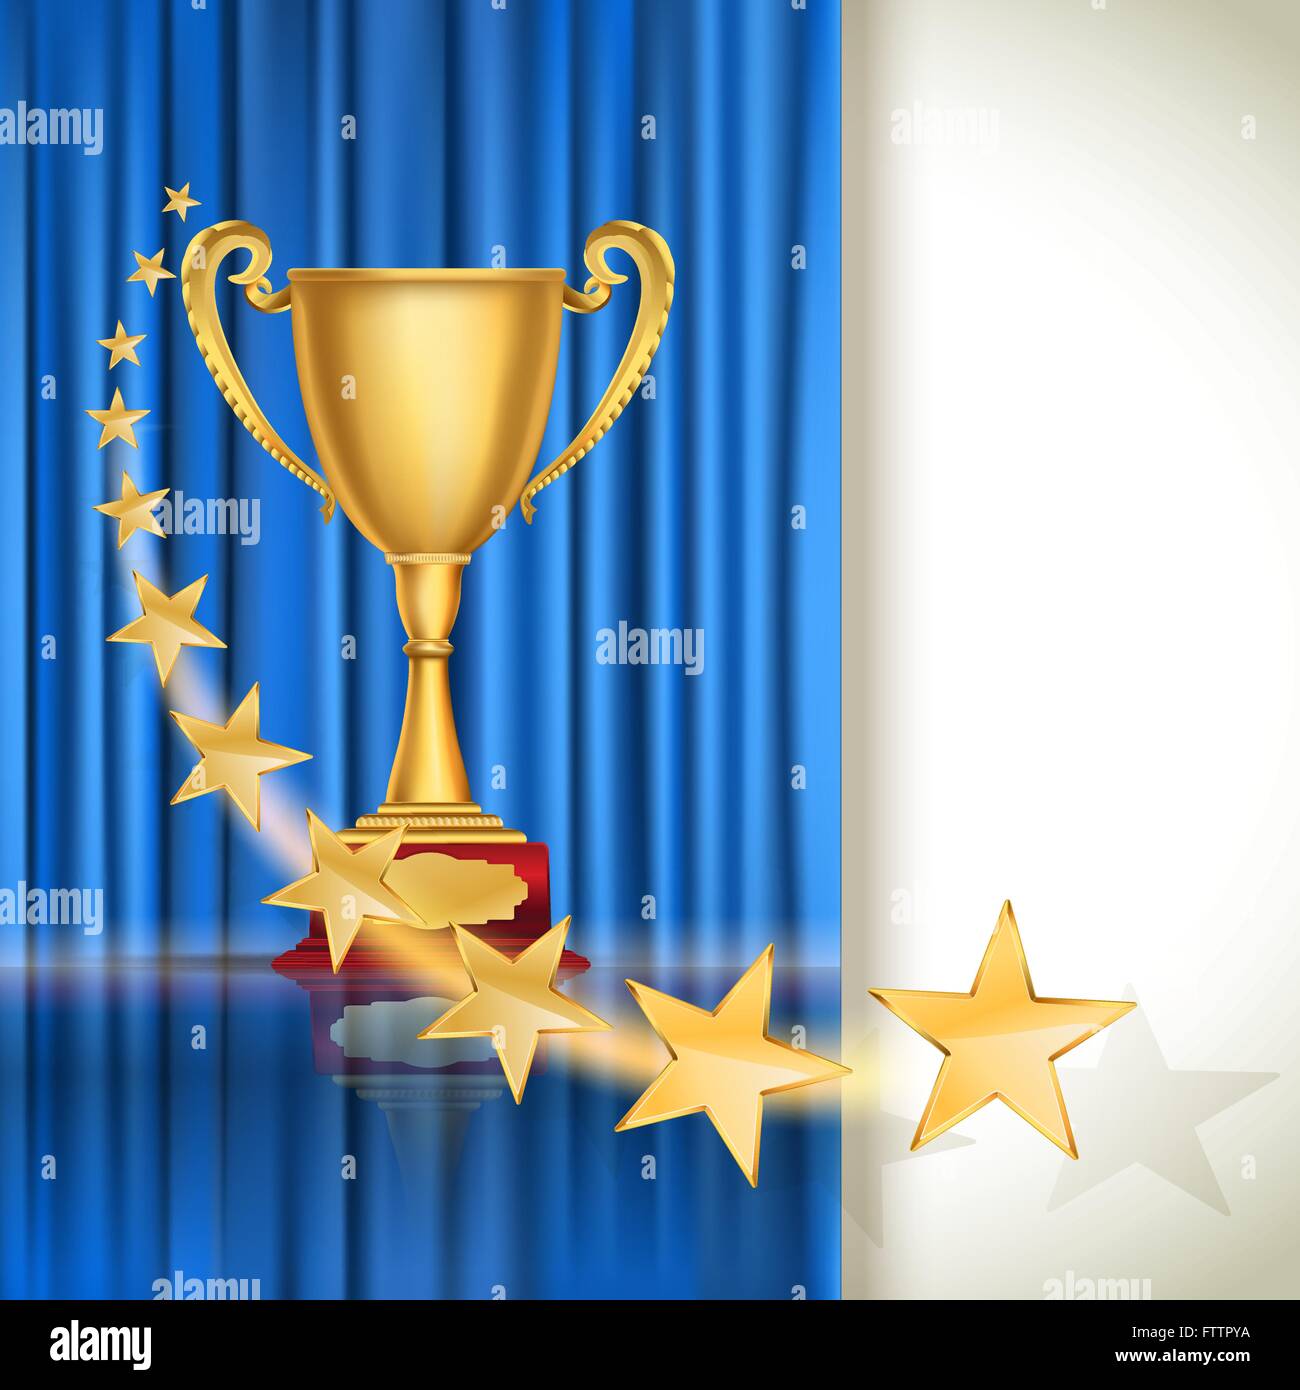 Golden sports cup on blue curtain background with flying stars. vector illustration Stock Vector